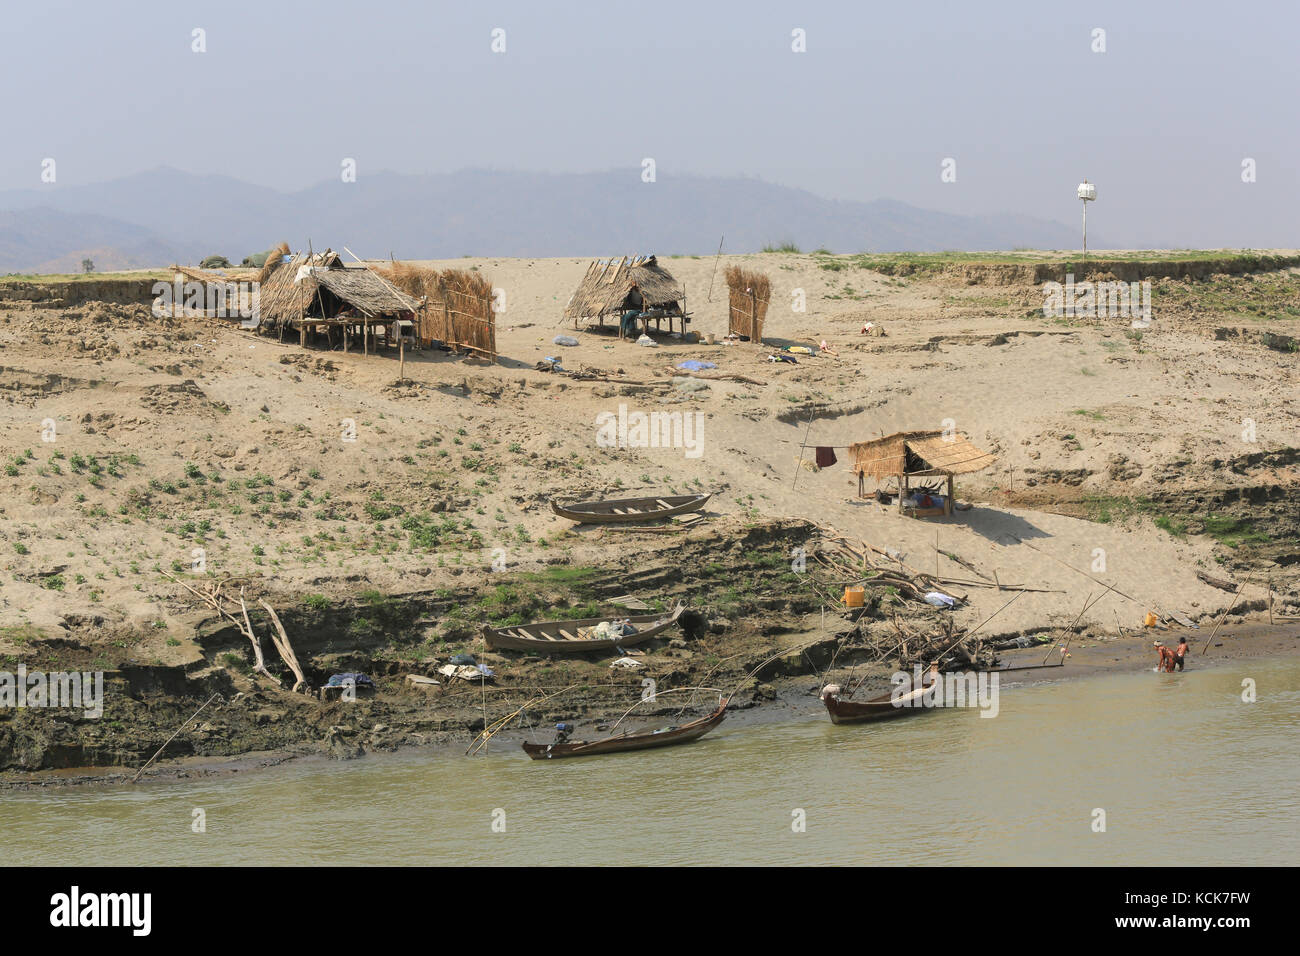 Seasonal huts and shelters along the banks of the Irrawaddy River in Myanmar (Burma). Stock Photo